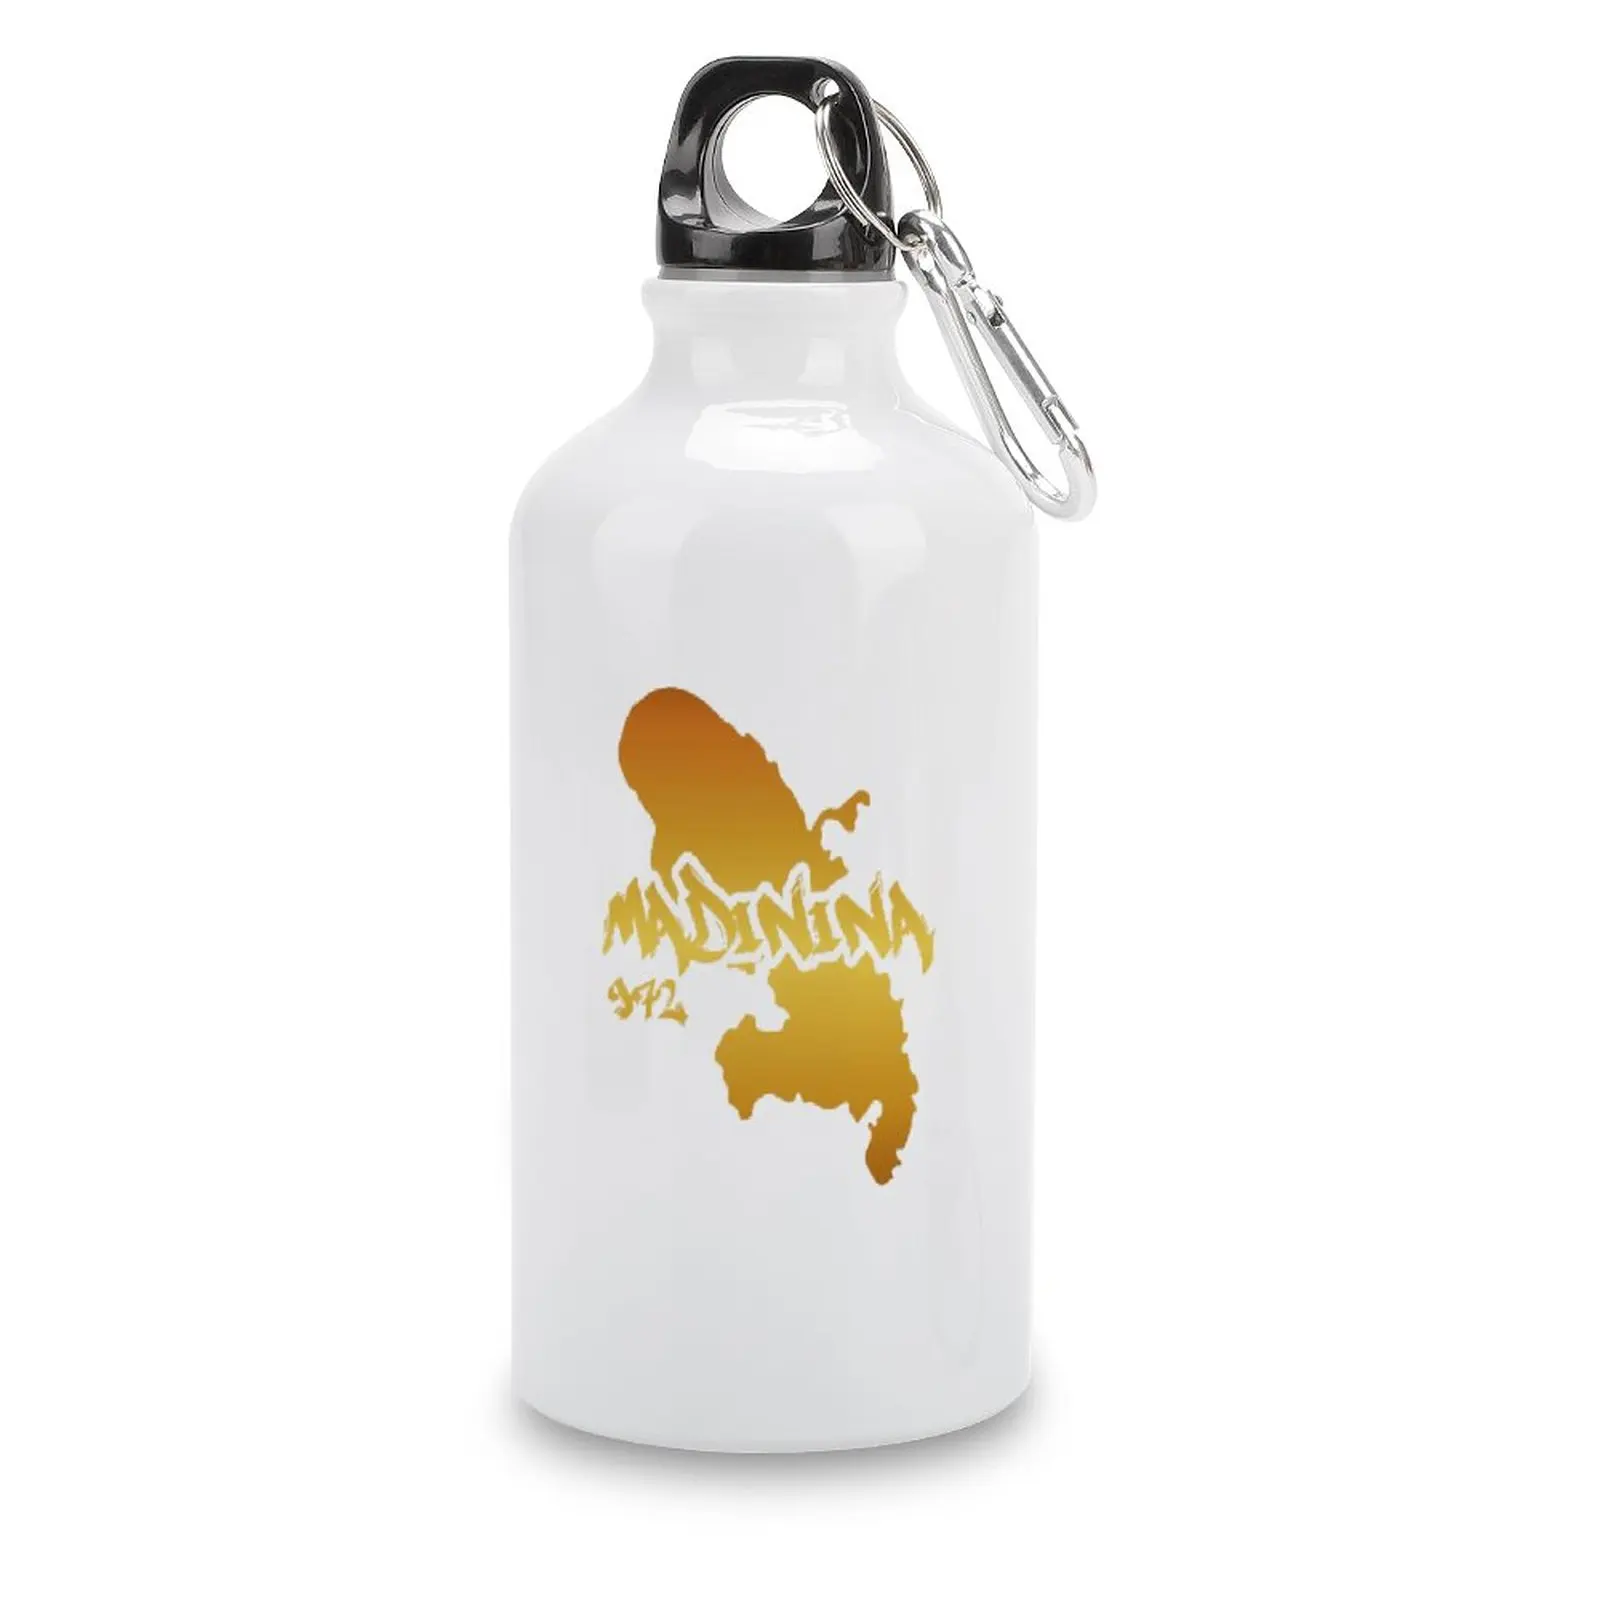 

DIY Bottle Madinina 972 Gold Martinique Classic Sport Bottle Aluminum Milk Cups Thermos Flask Novelty Humor Graphic Kettle